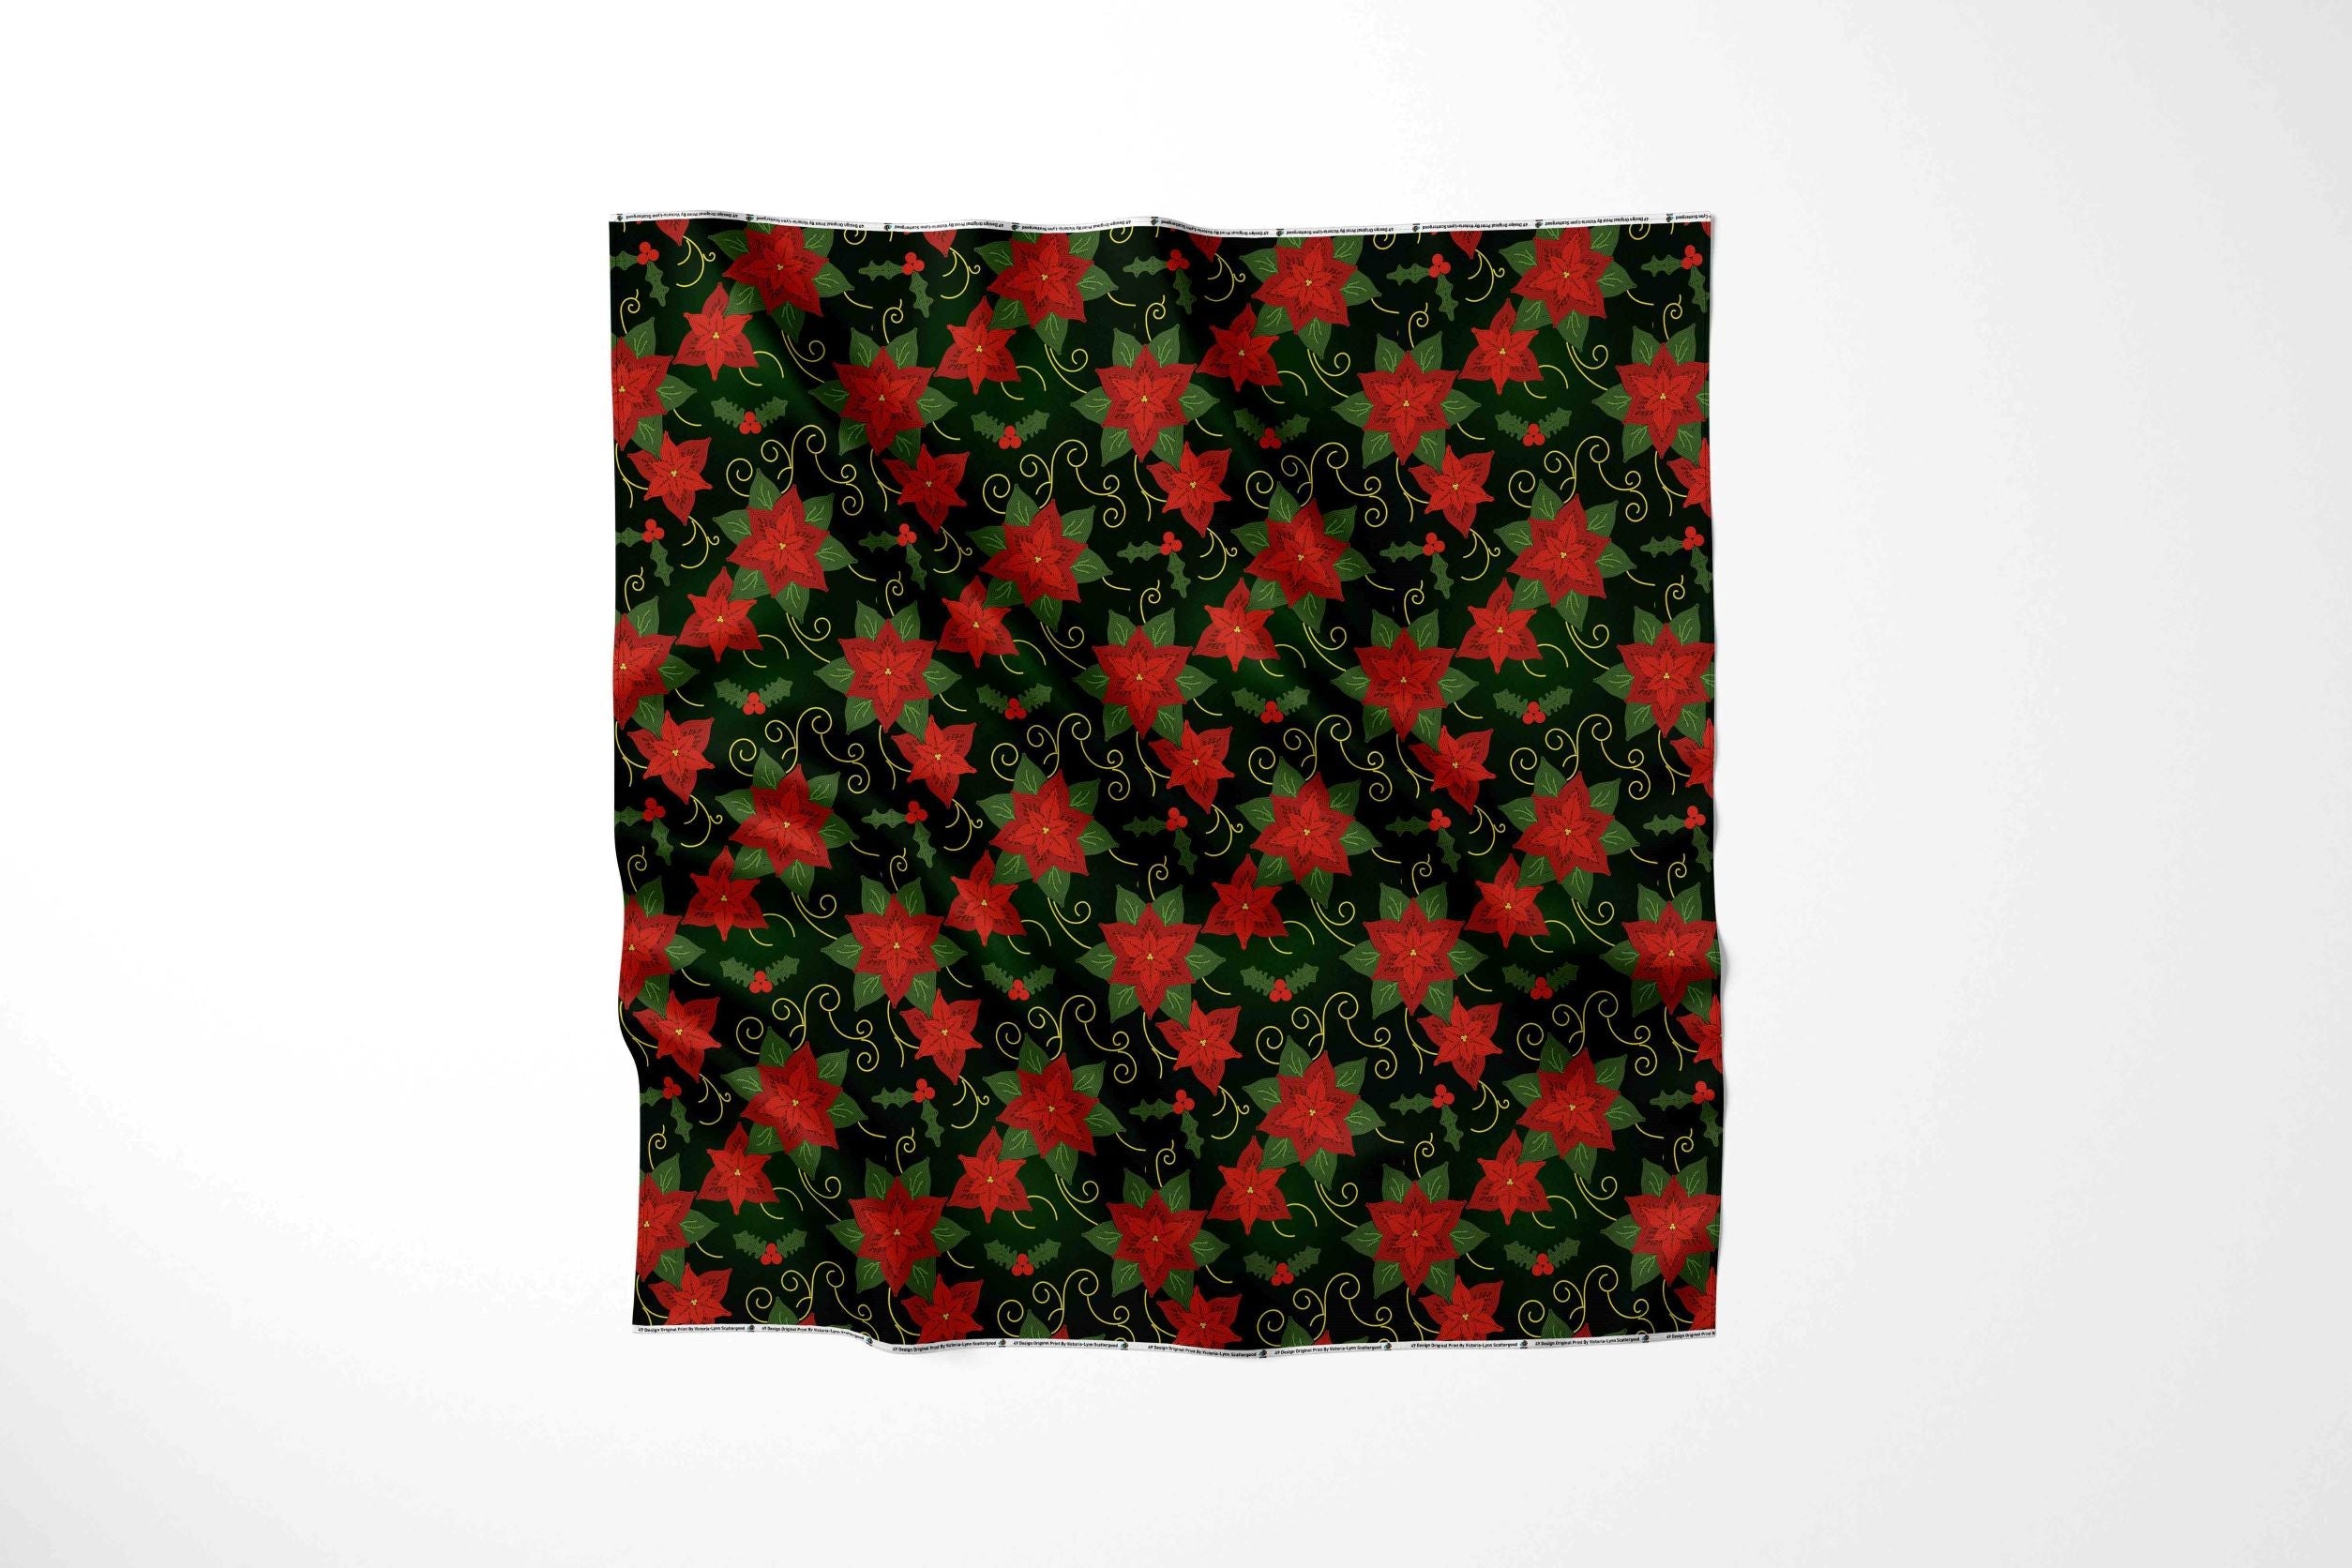 Poinnsettia Parade Cotton Fabric by the Yard